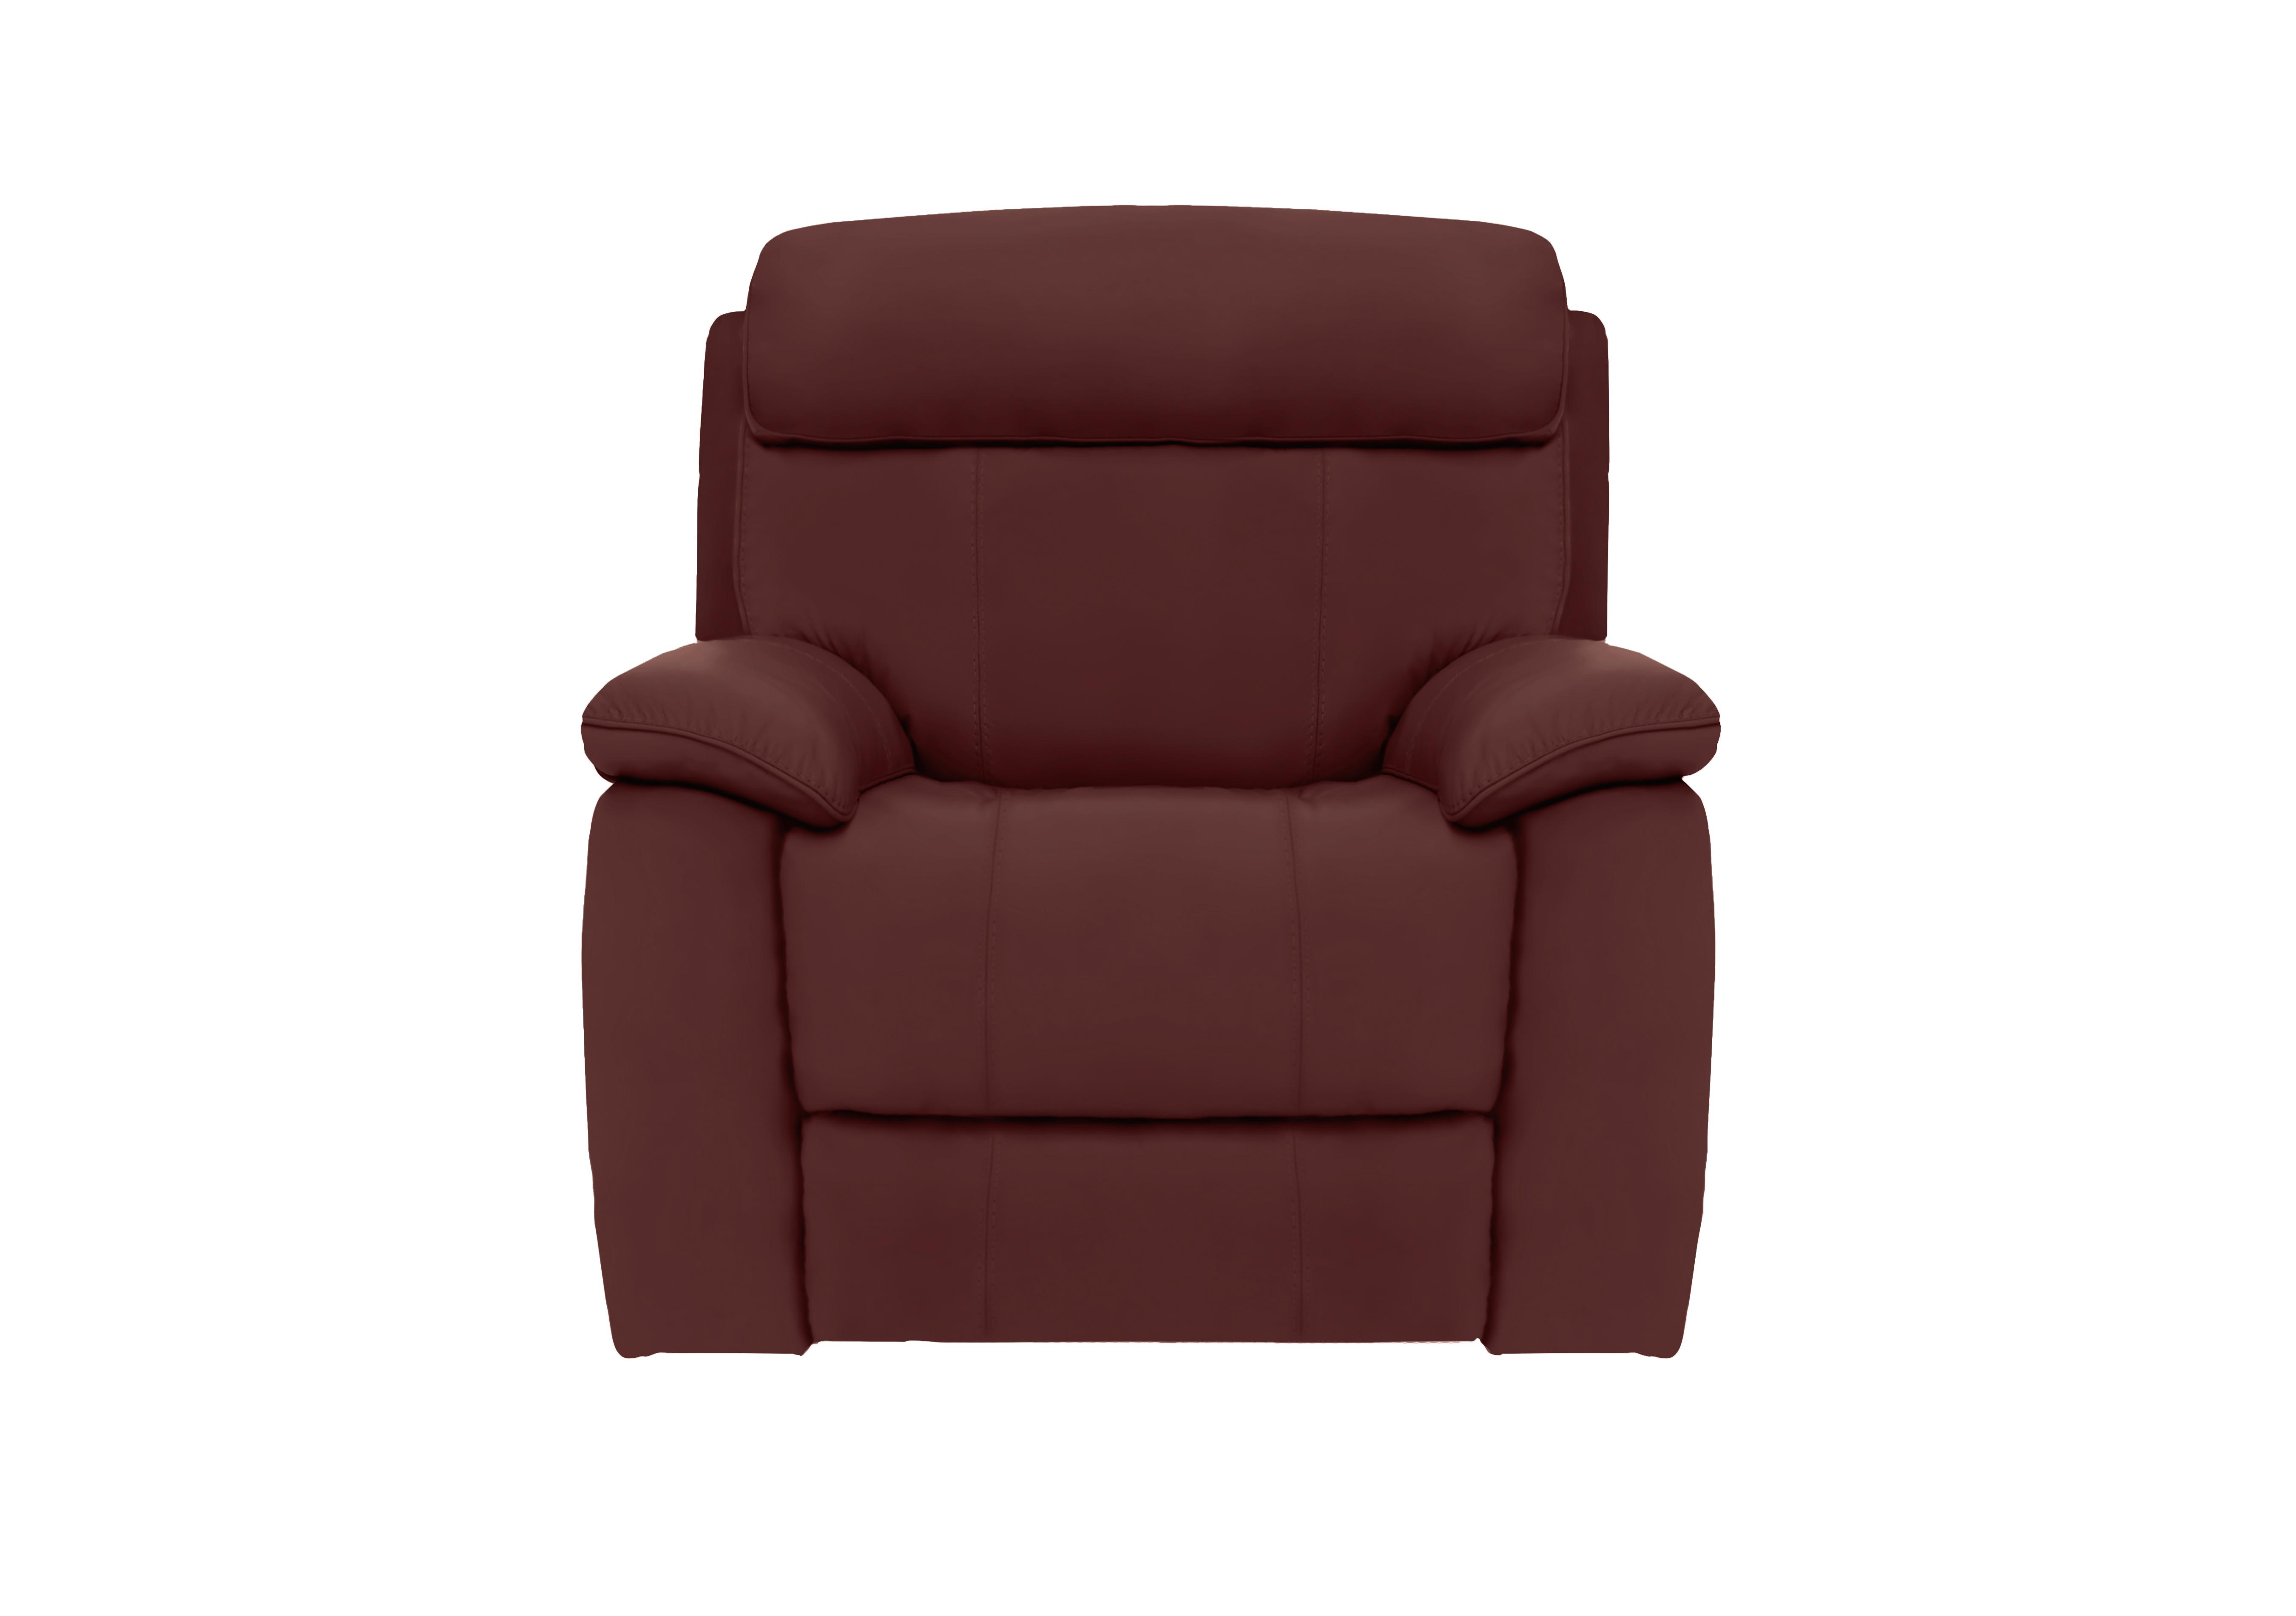 Moreno Leather Armchair in An-751b Burgundy on Furniture Village